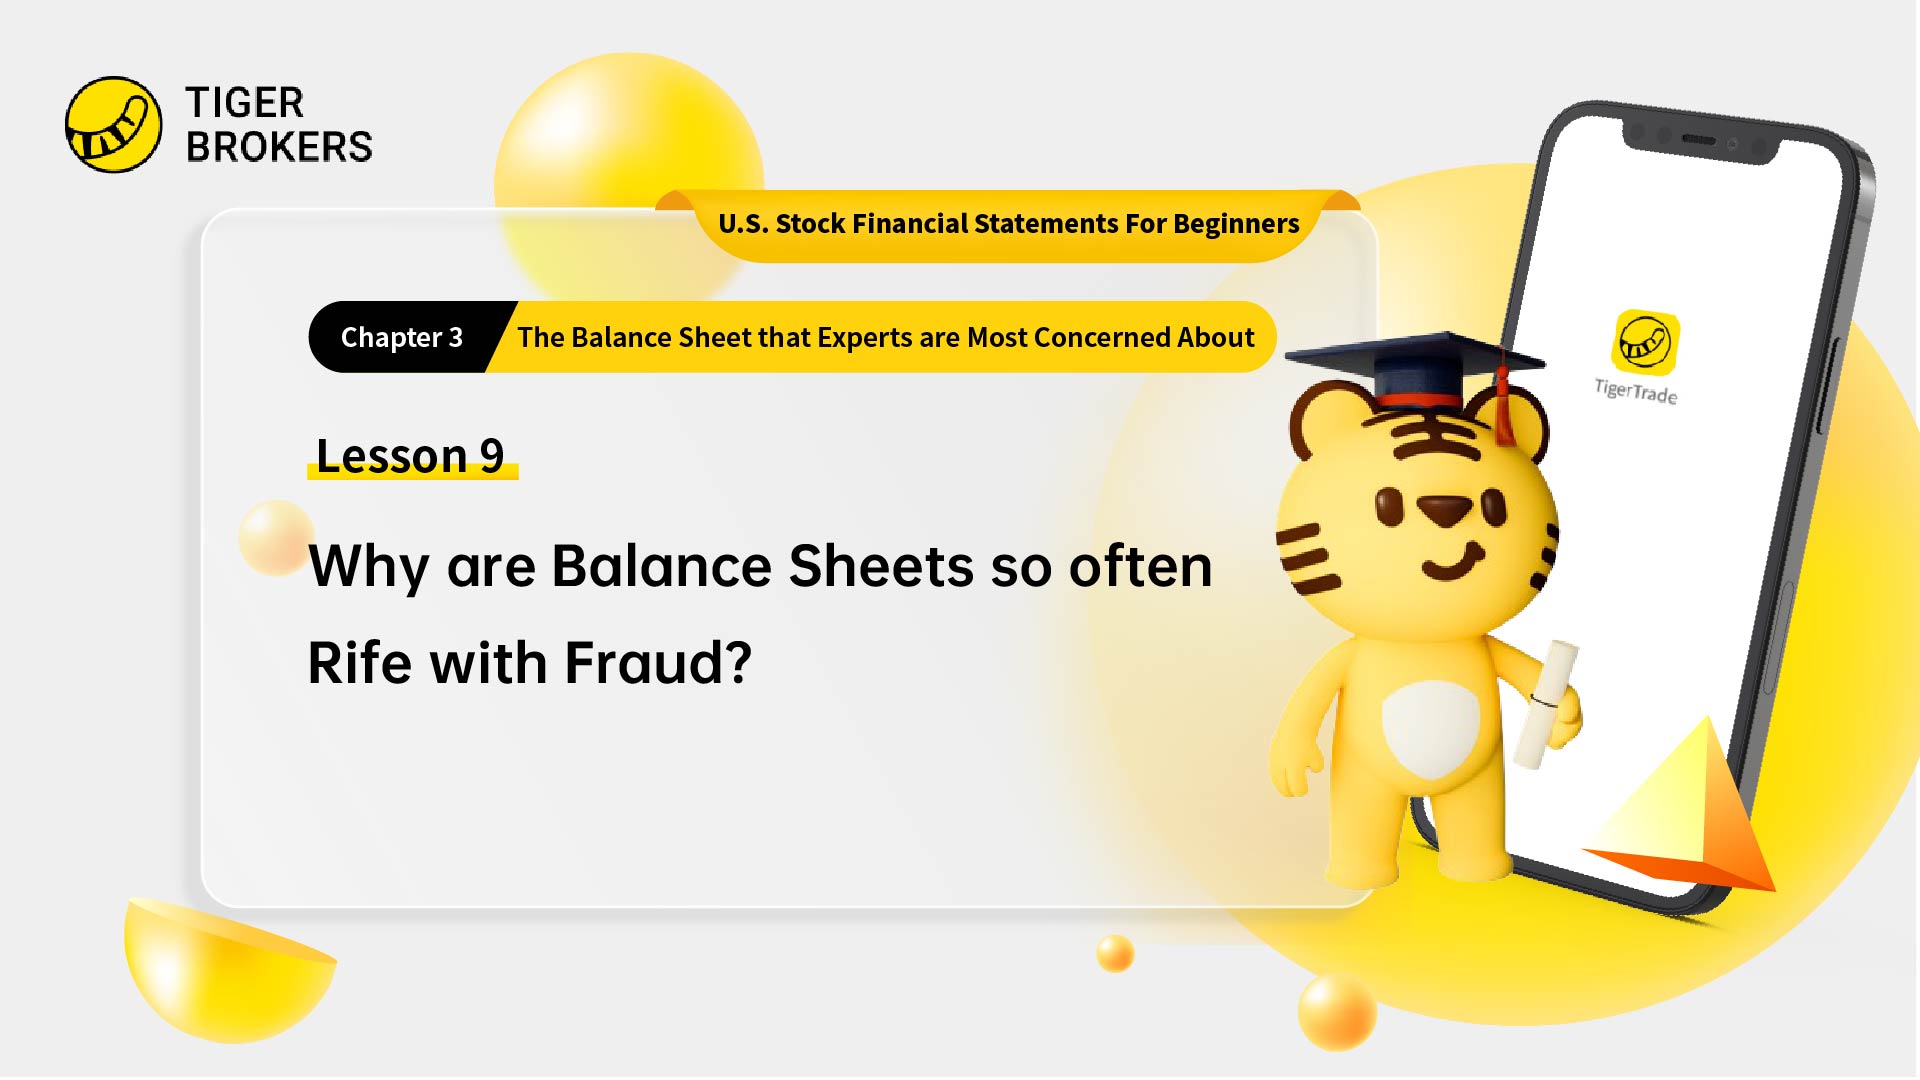 Lesson9：Why are balance sheets so often rife with fraud?